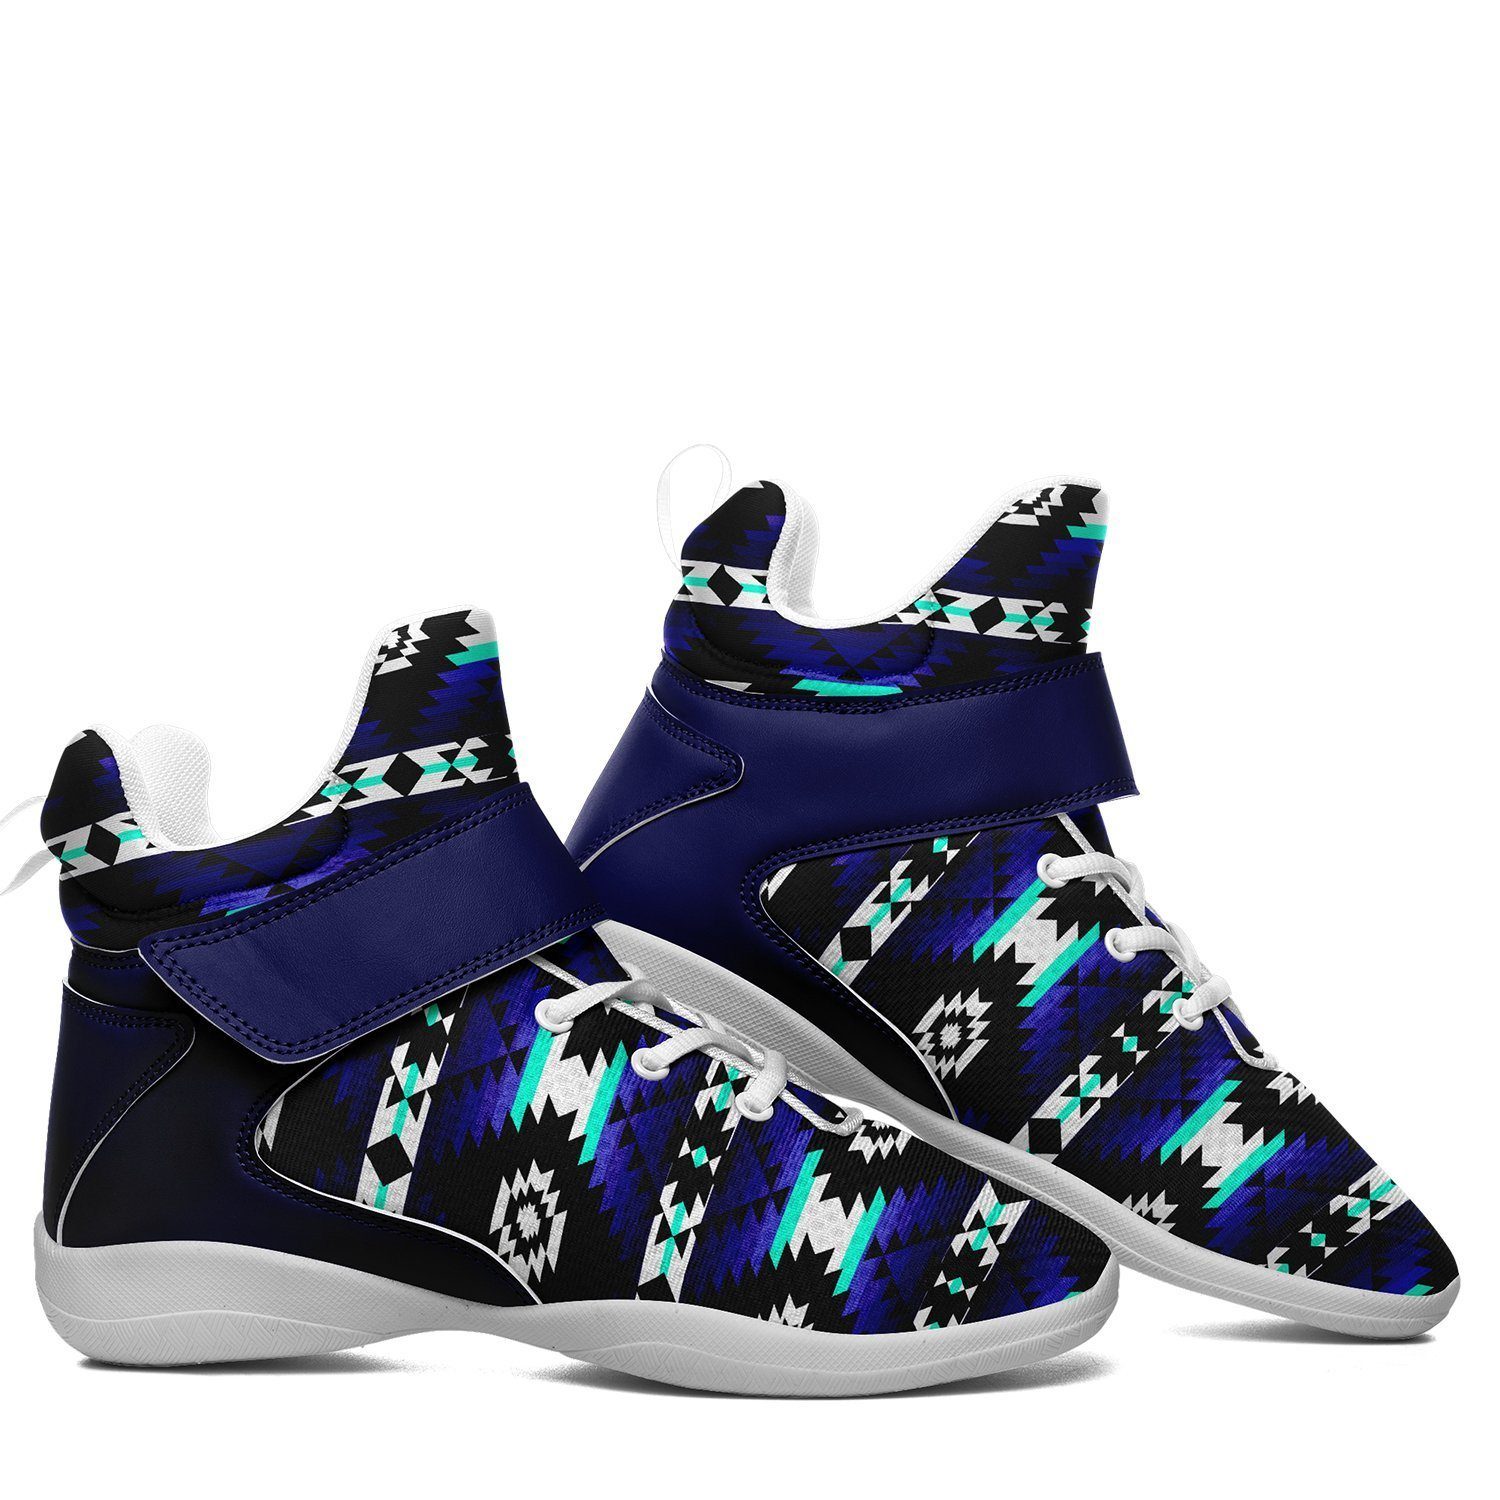 Cree Confederacy Midnight Ipottaa Basketball / Sport High Top Shoes - White Sole 49 Dzine 